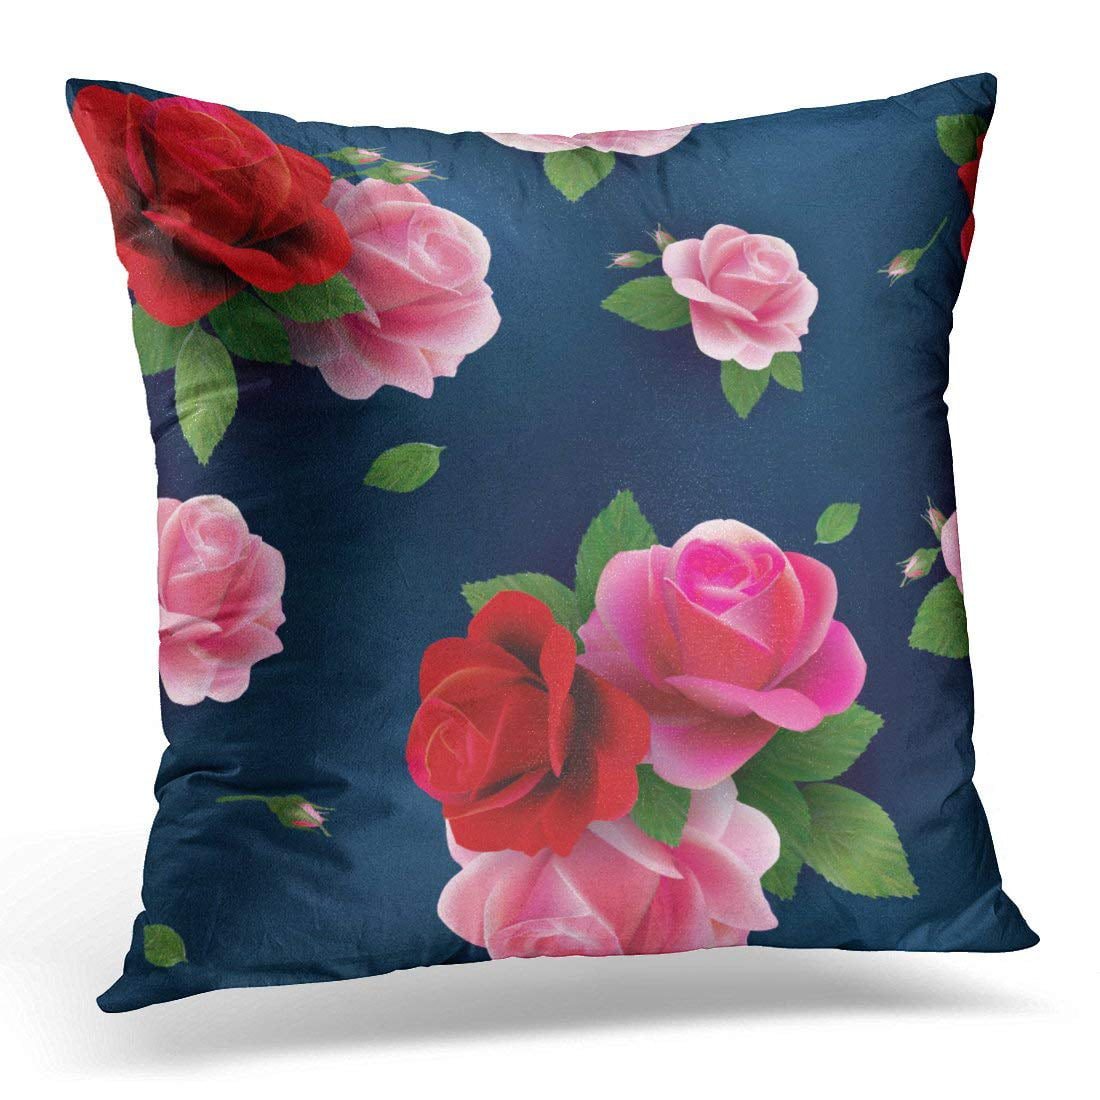 Awesome Red Roses Flower Lover Designs Beautiful Red Rose Flower Bloom Florist Lover Throw Pillow 16x16 Multicolor 